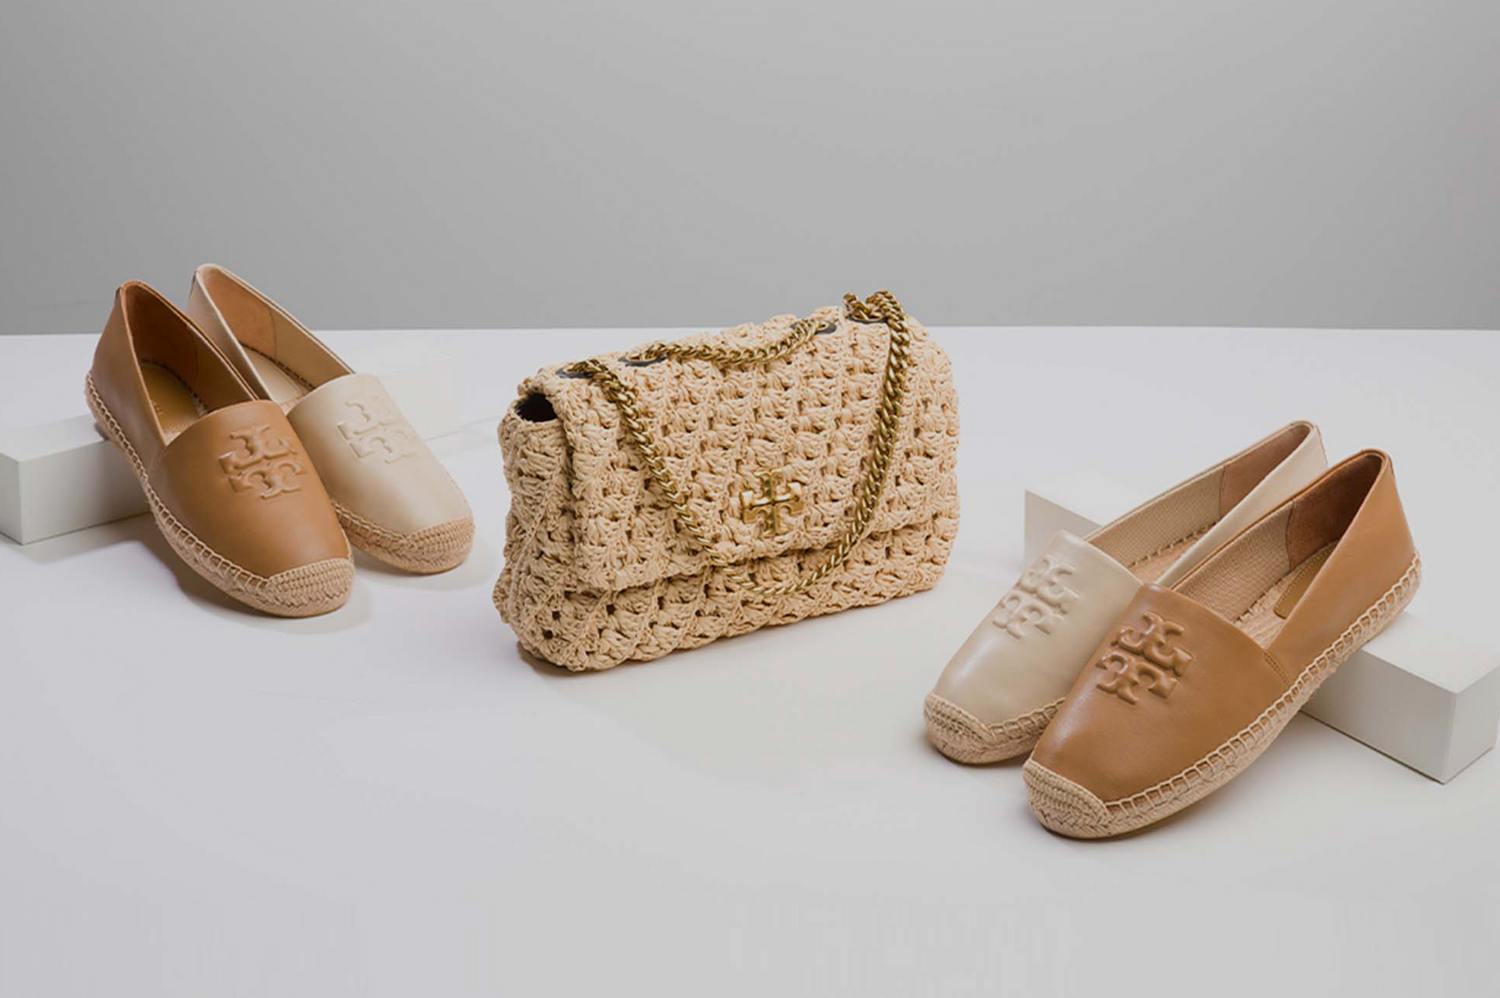 TORY BURCH pas cher sur THE BRADERY